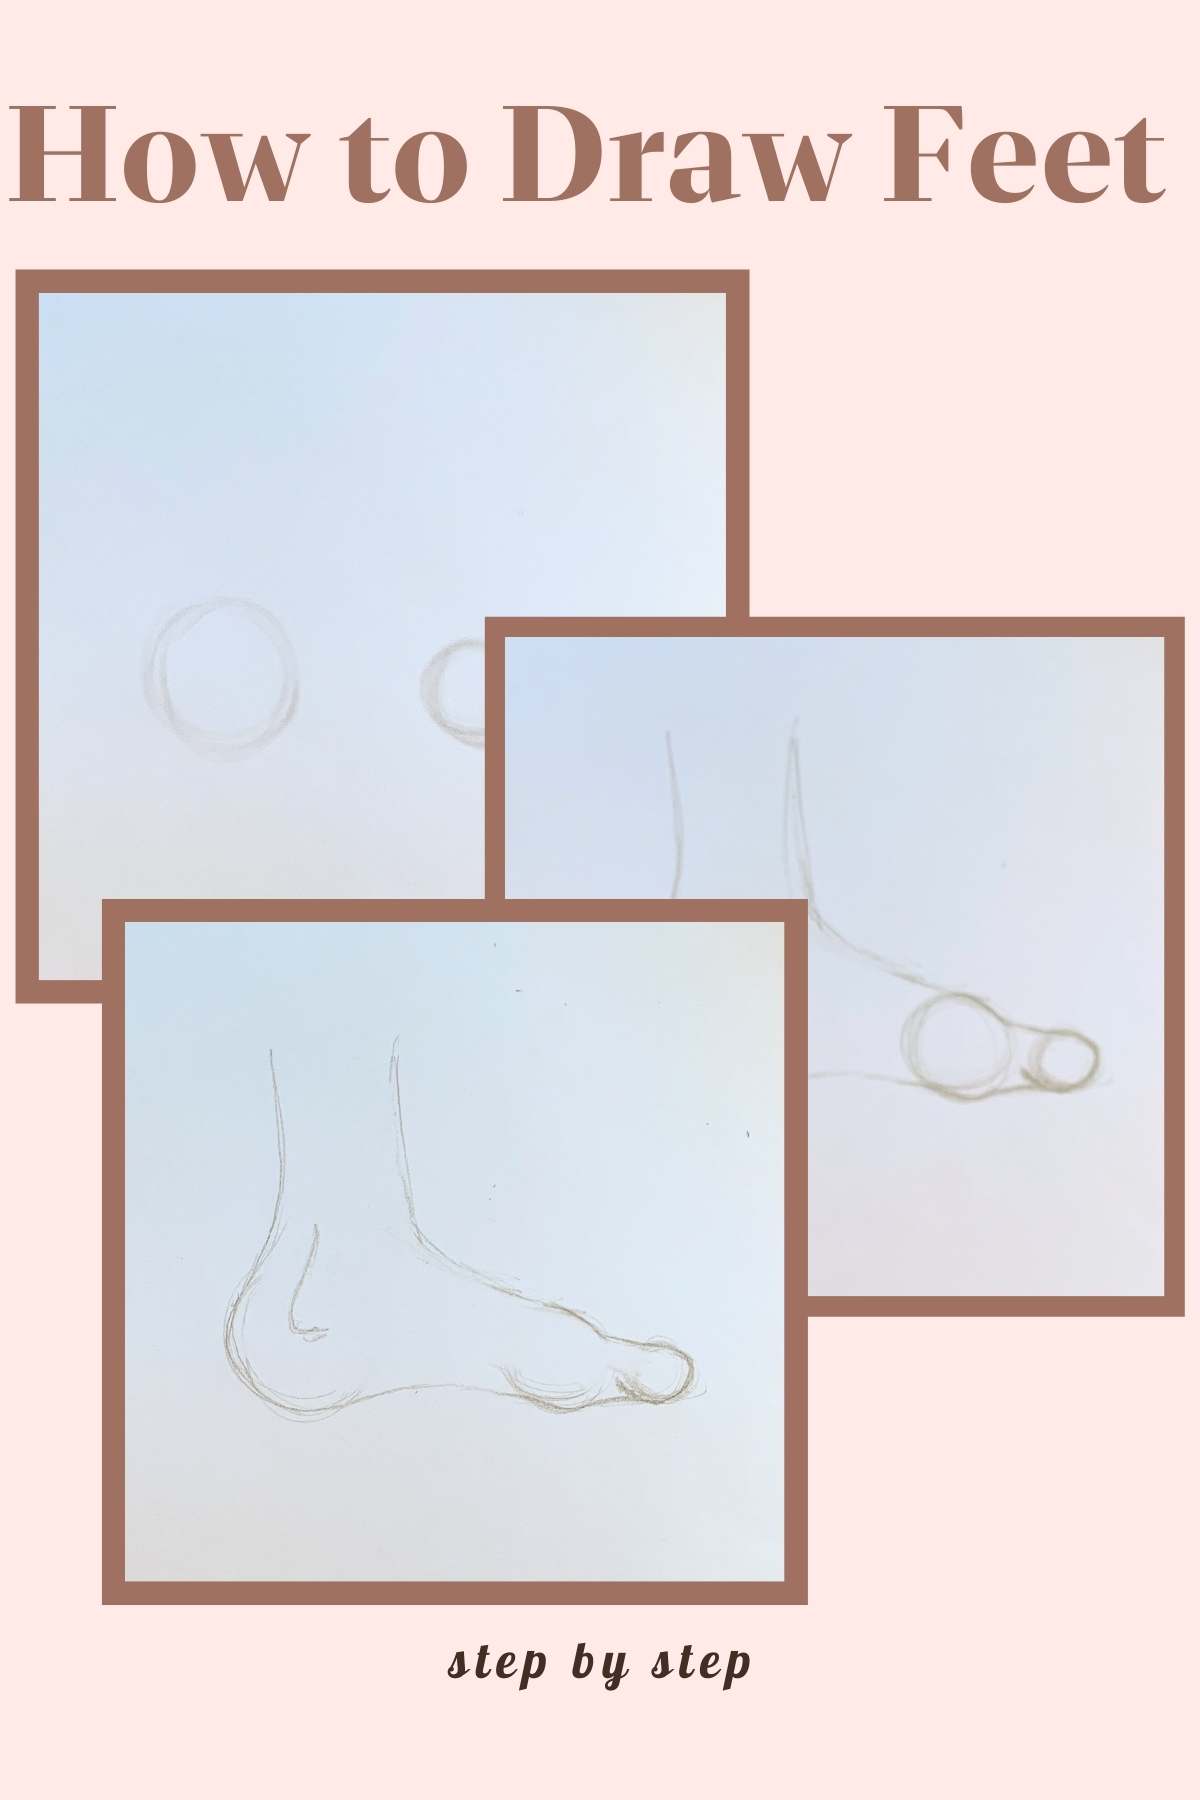 Using shapes to learn how to draw feet